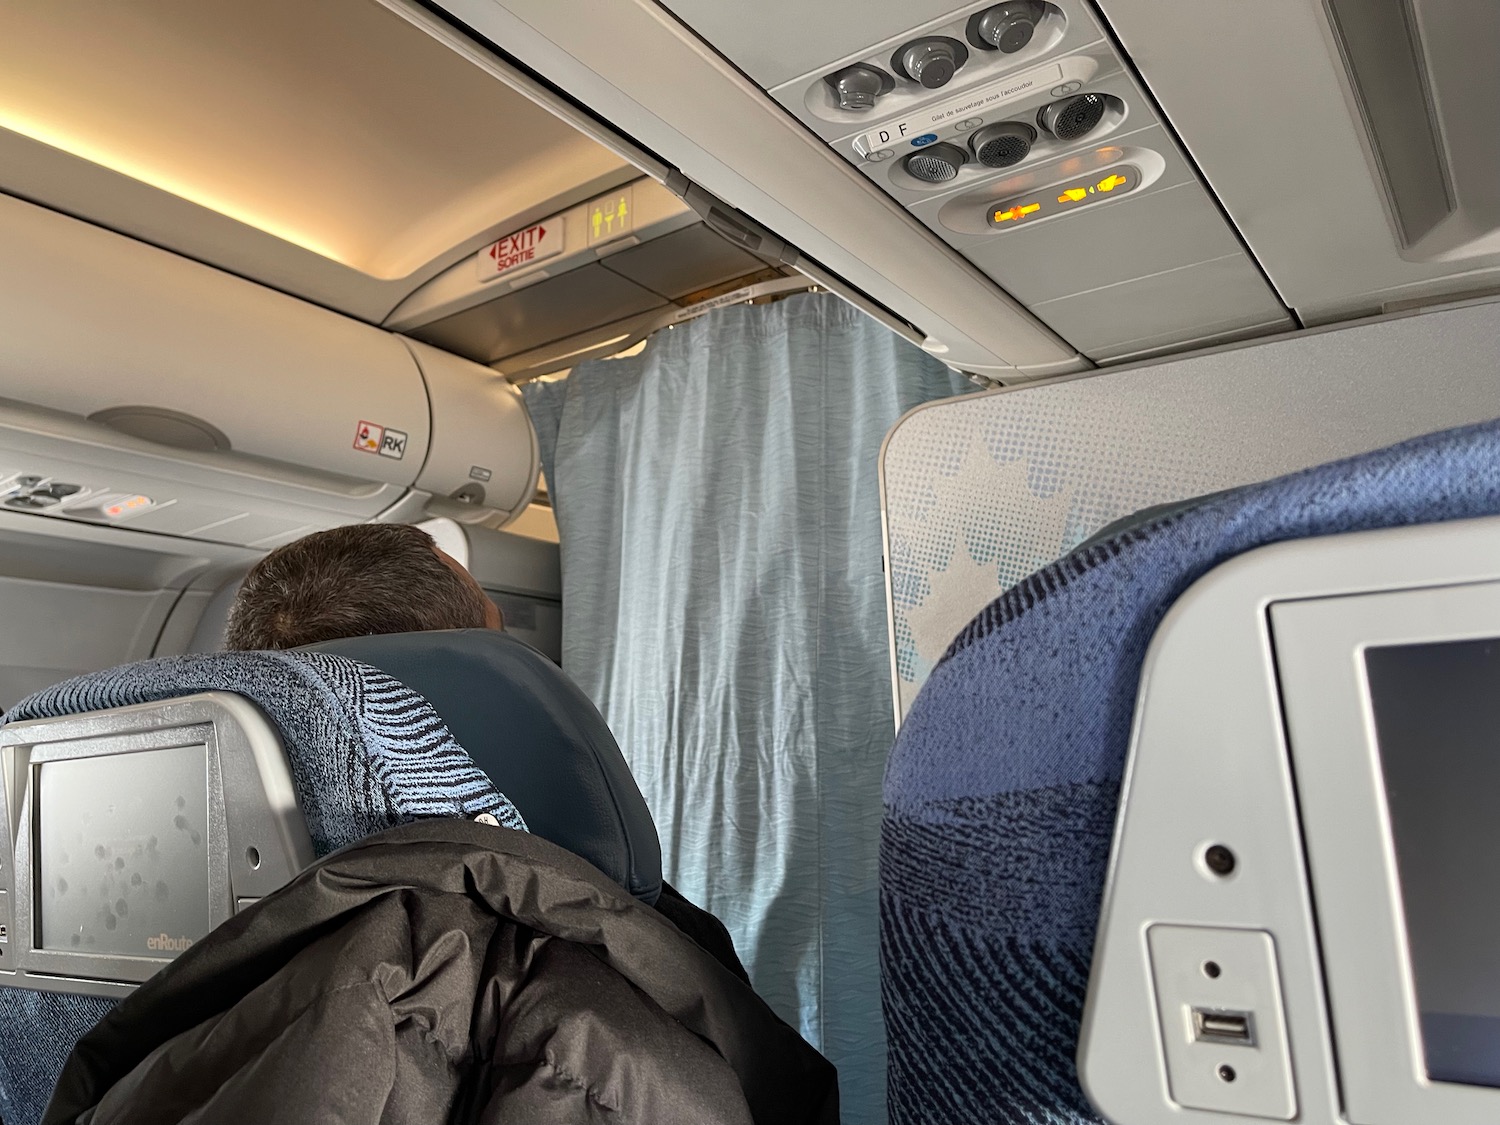 a person sitting in a plane